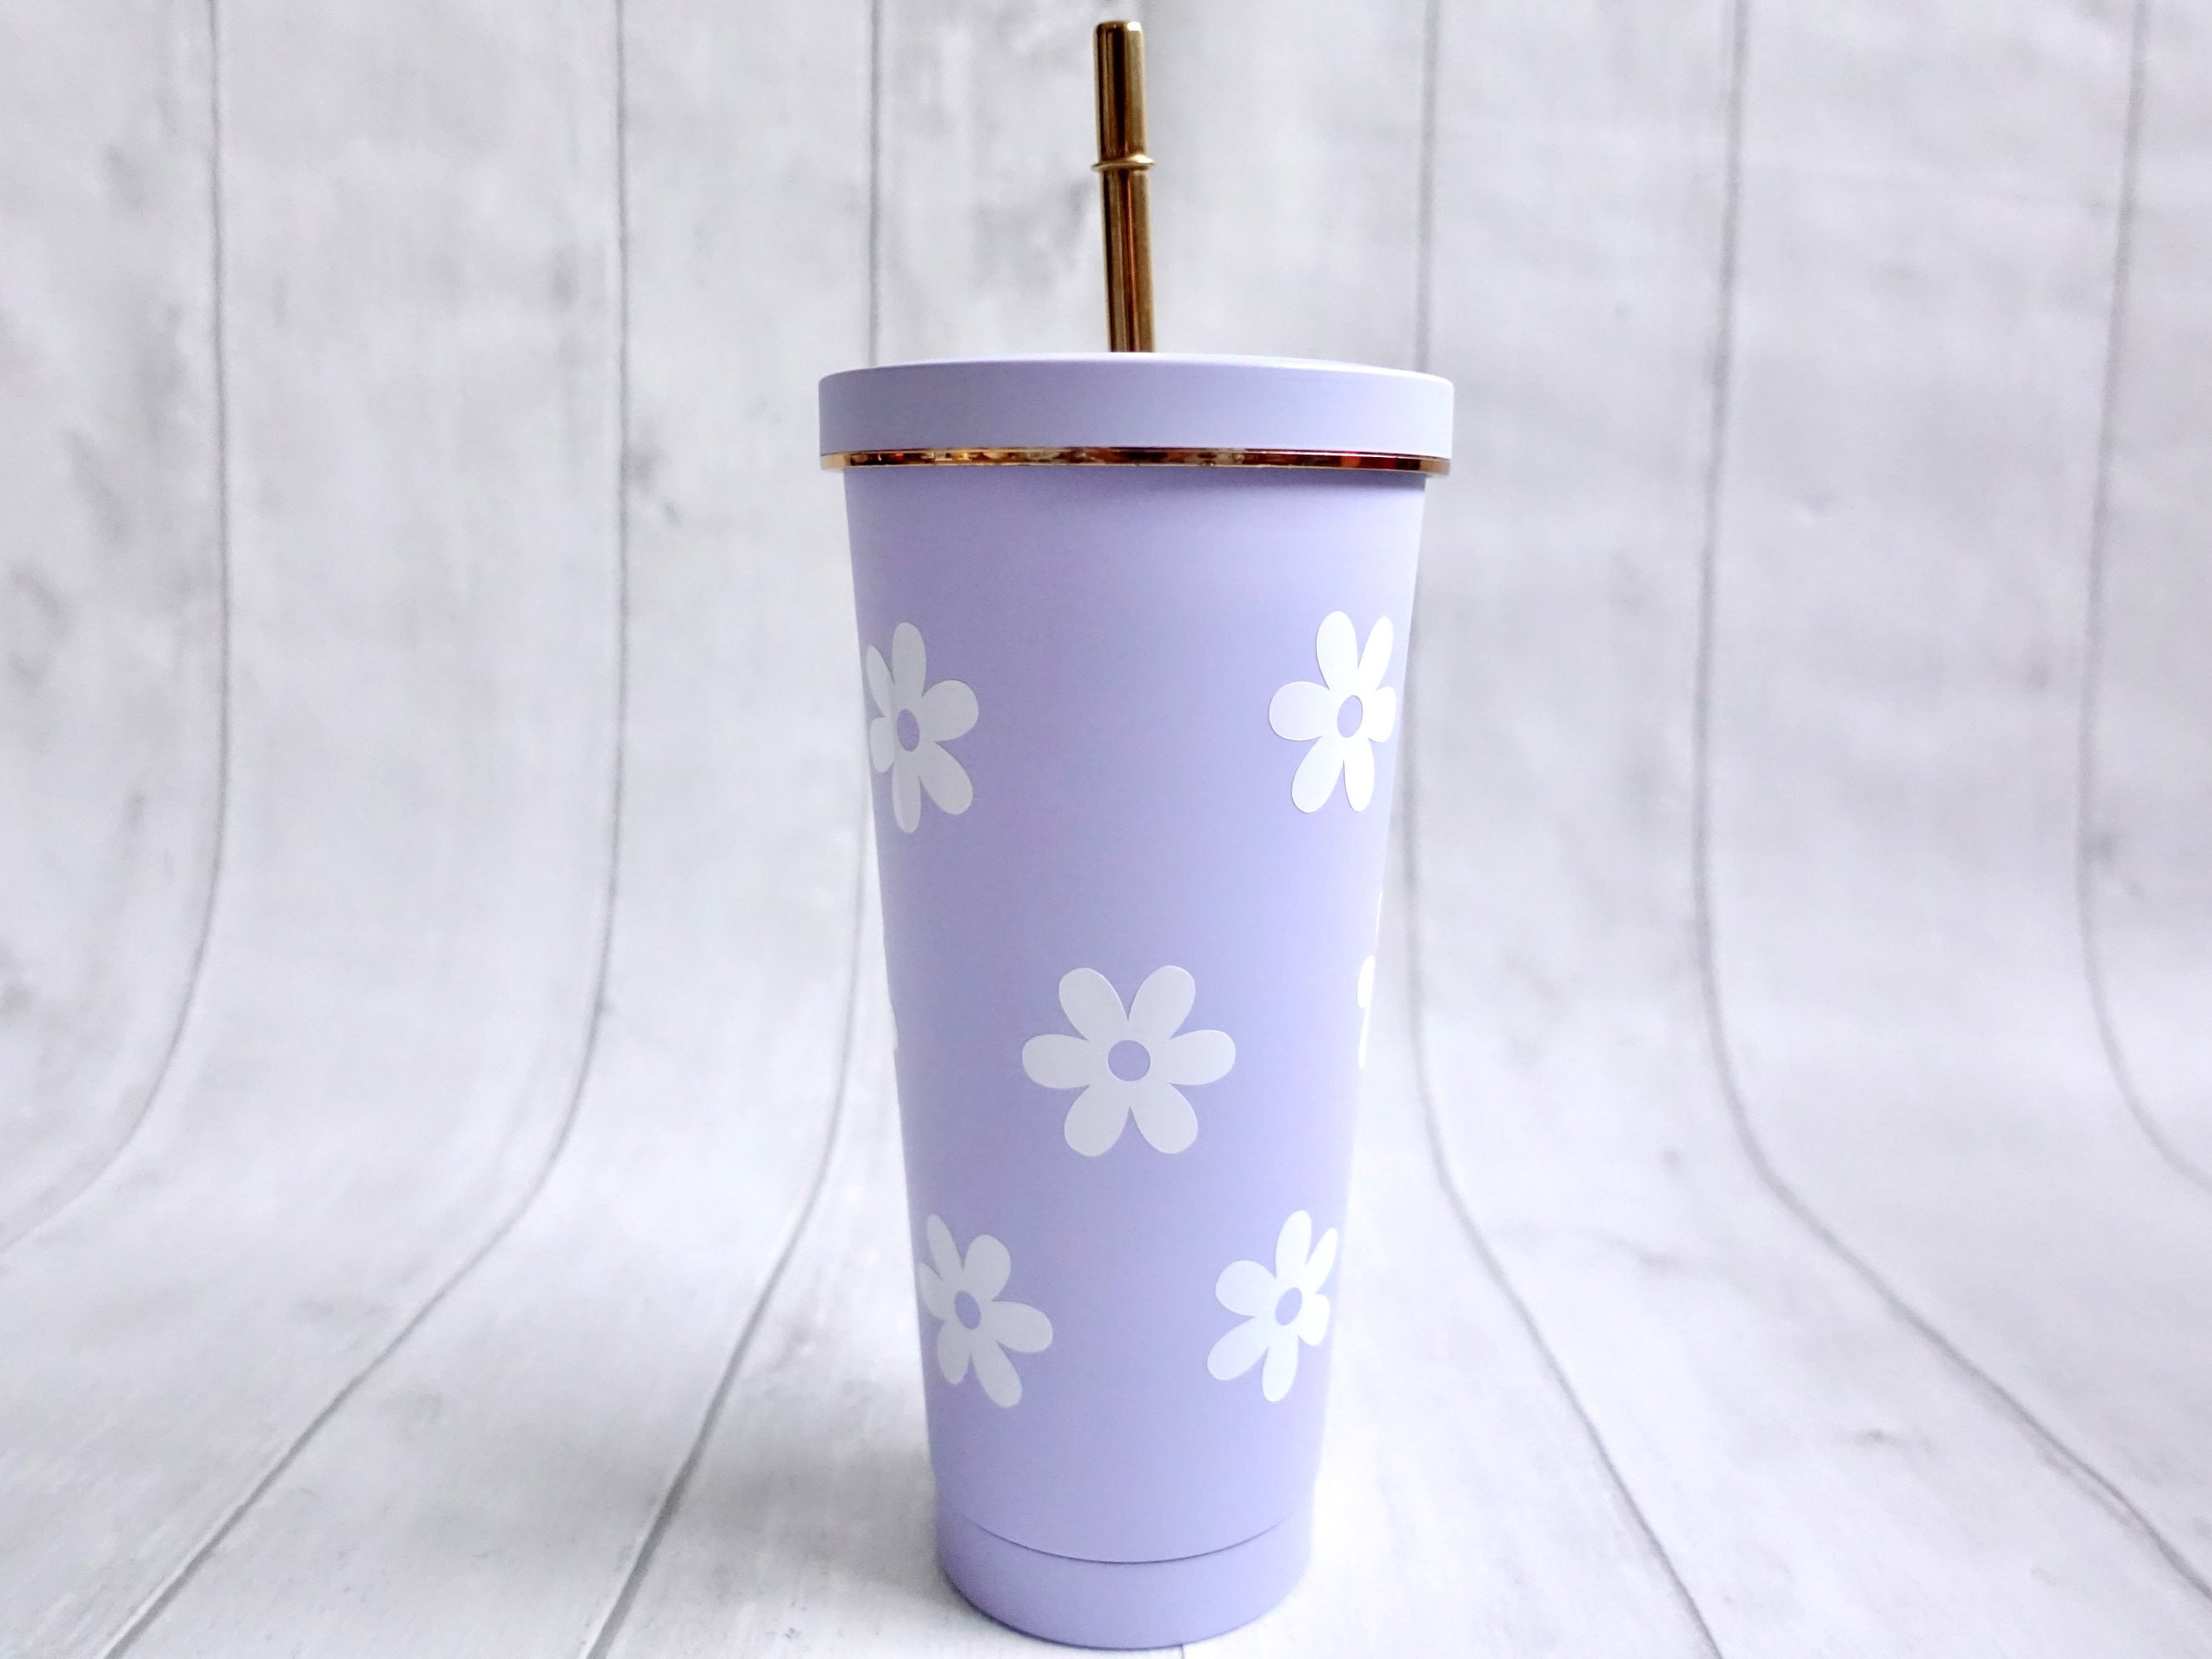 Cheer.US 470ml Tumbler Insulated Tumblers with Lids and Straw